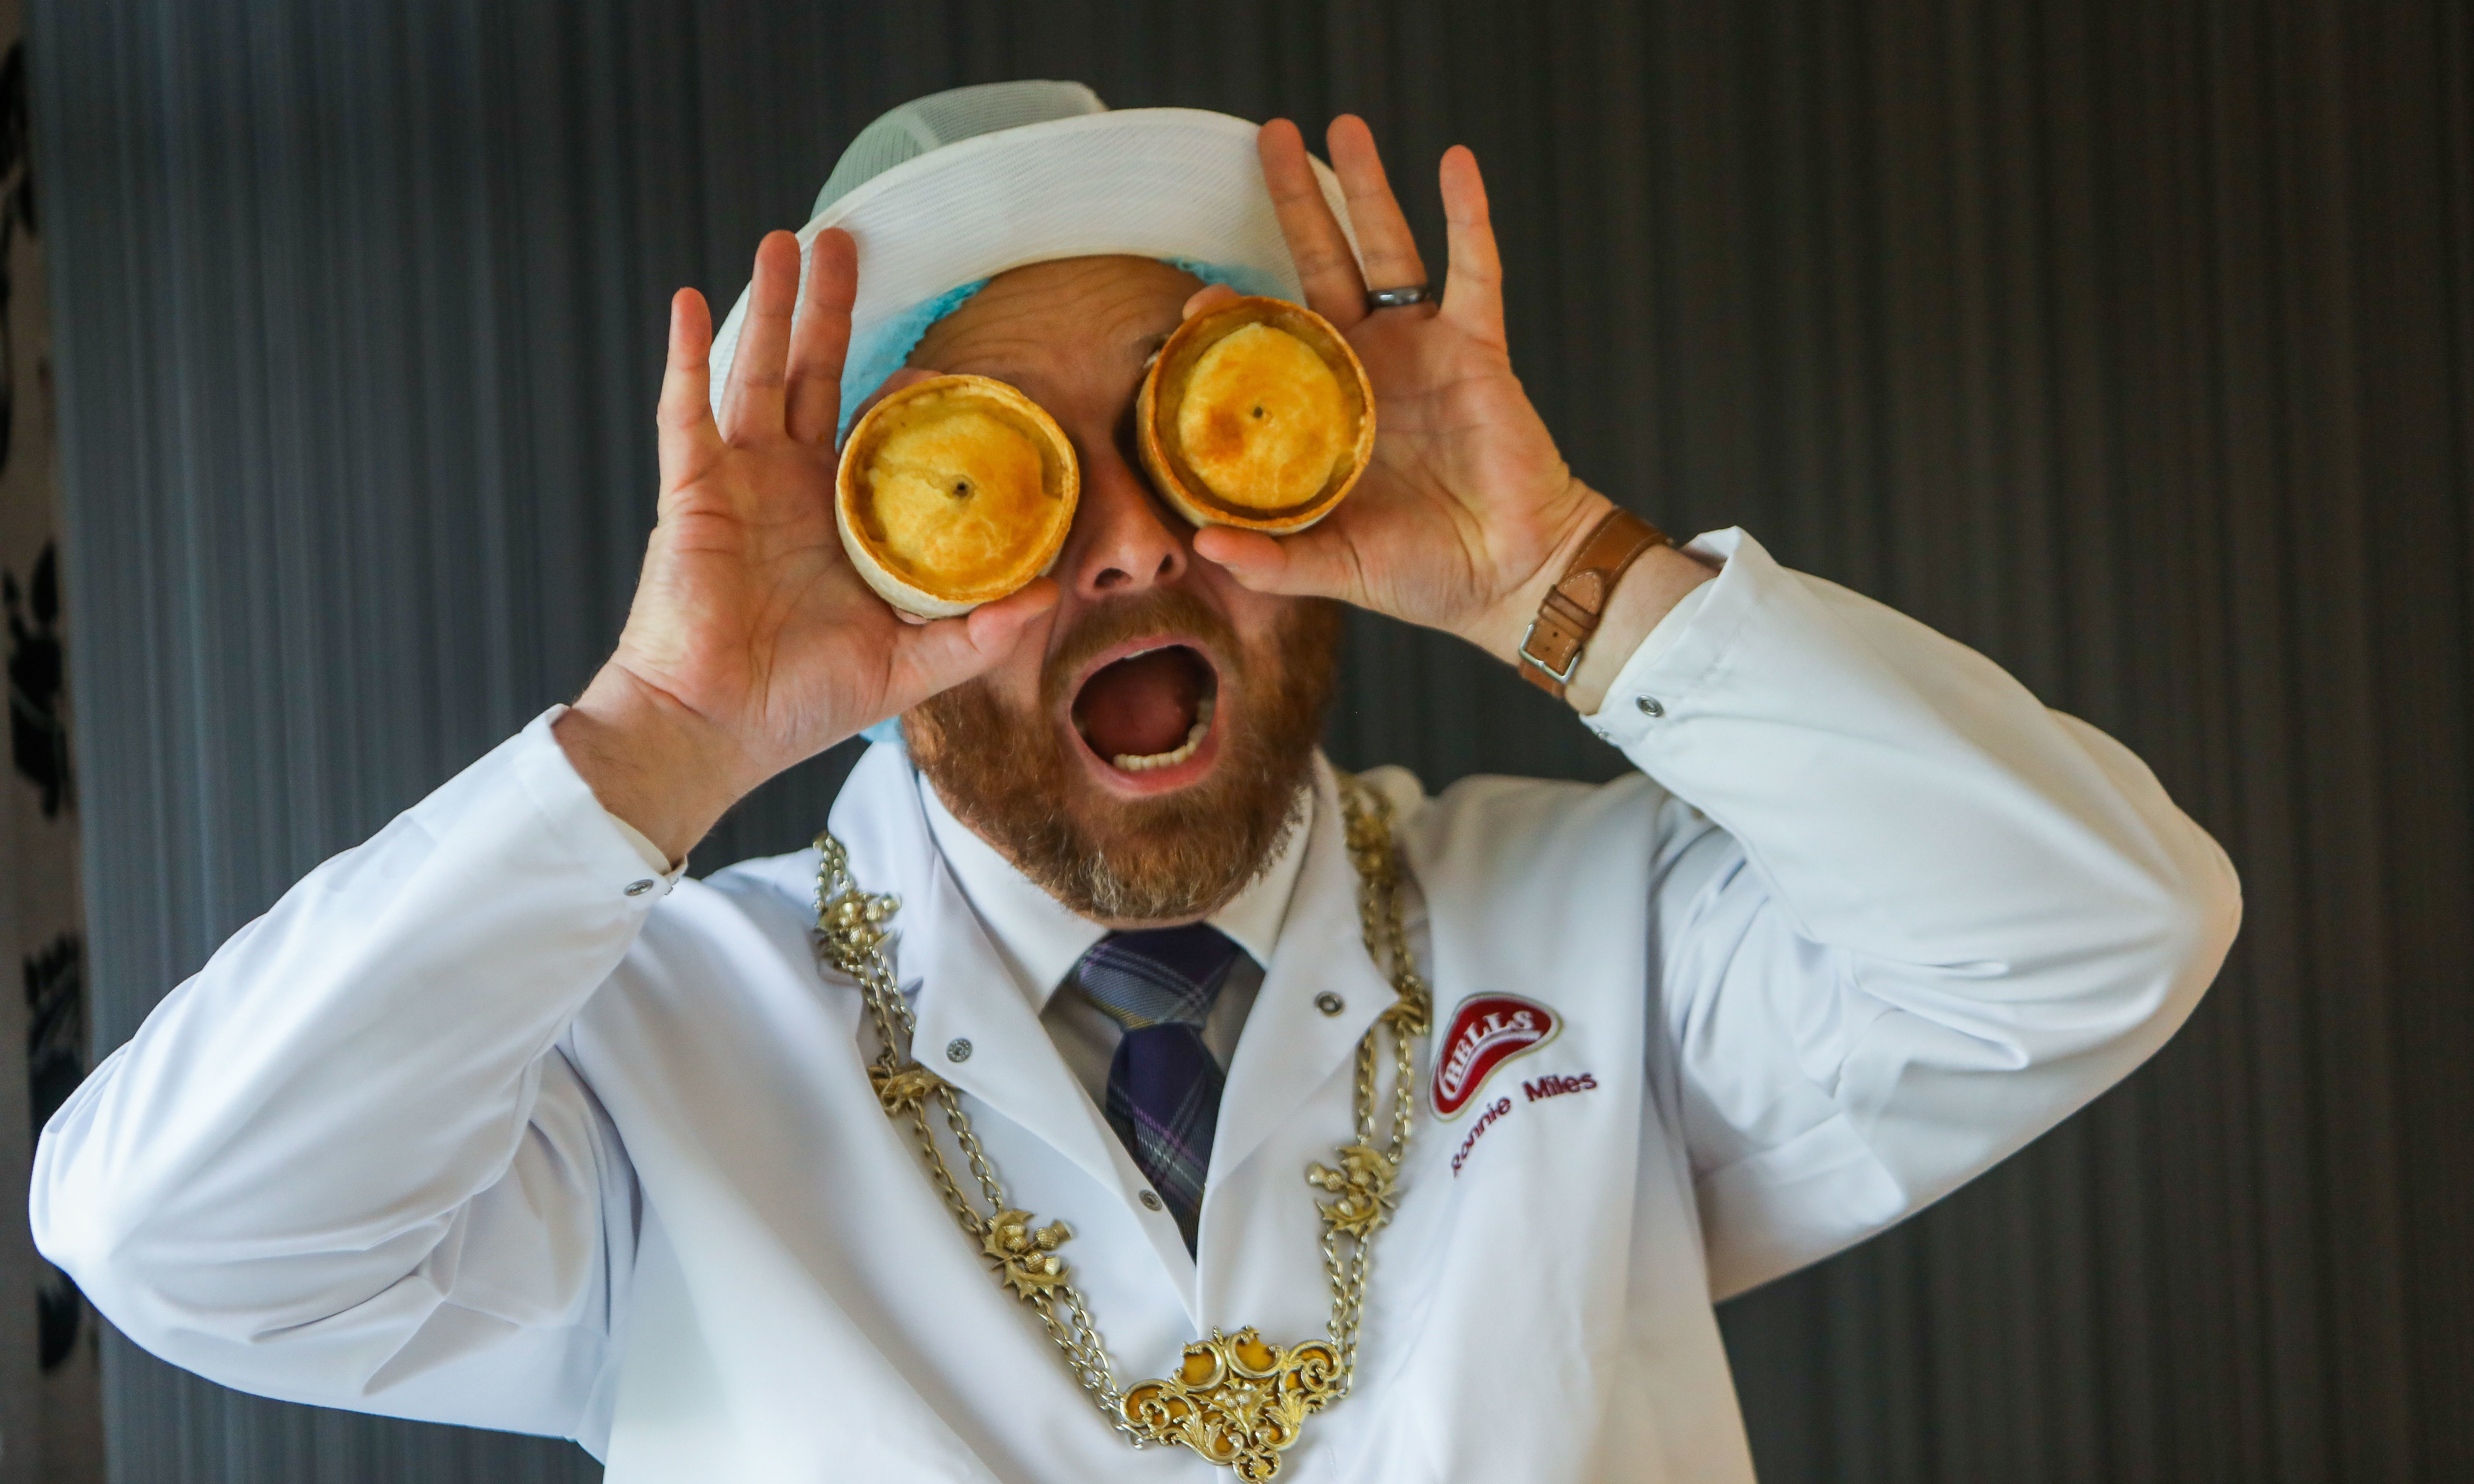 Scottish Bakers president Ronnie Miles has an "Eye for a Pie"